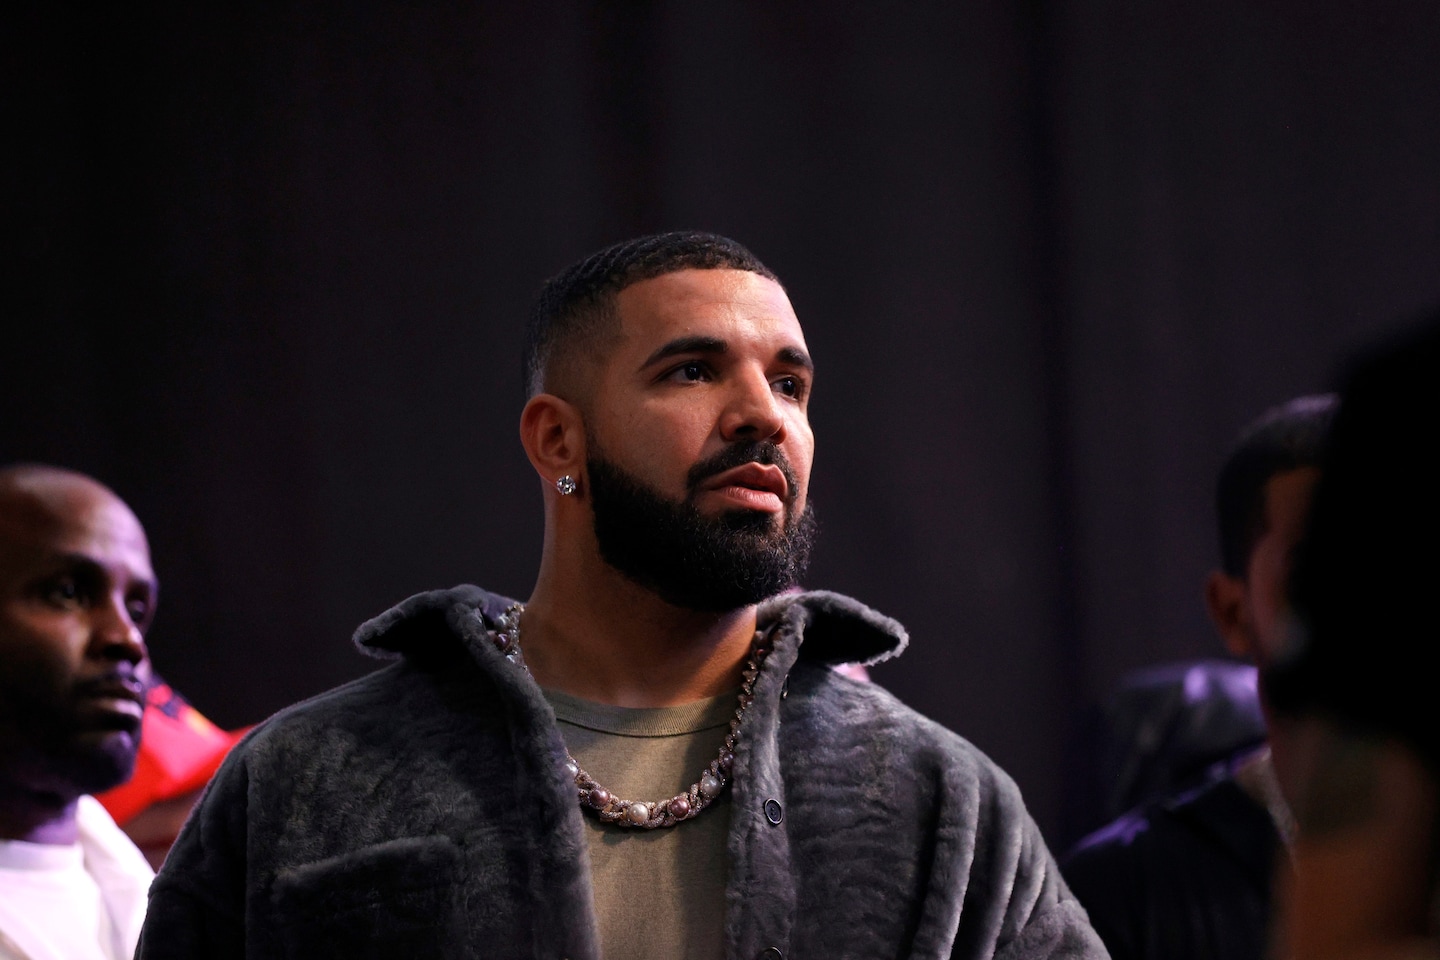 A song about Drake’s butt might be a real breakthrough for AI art